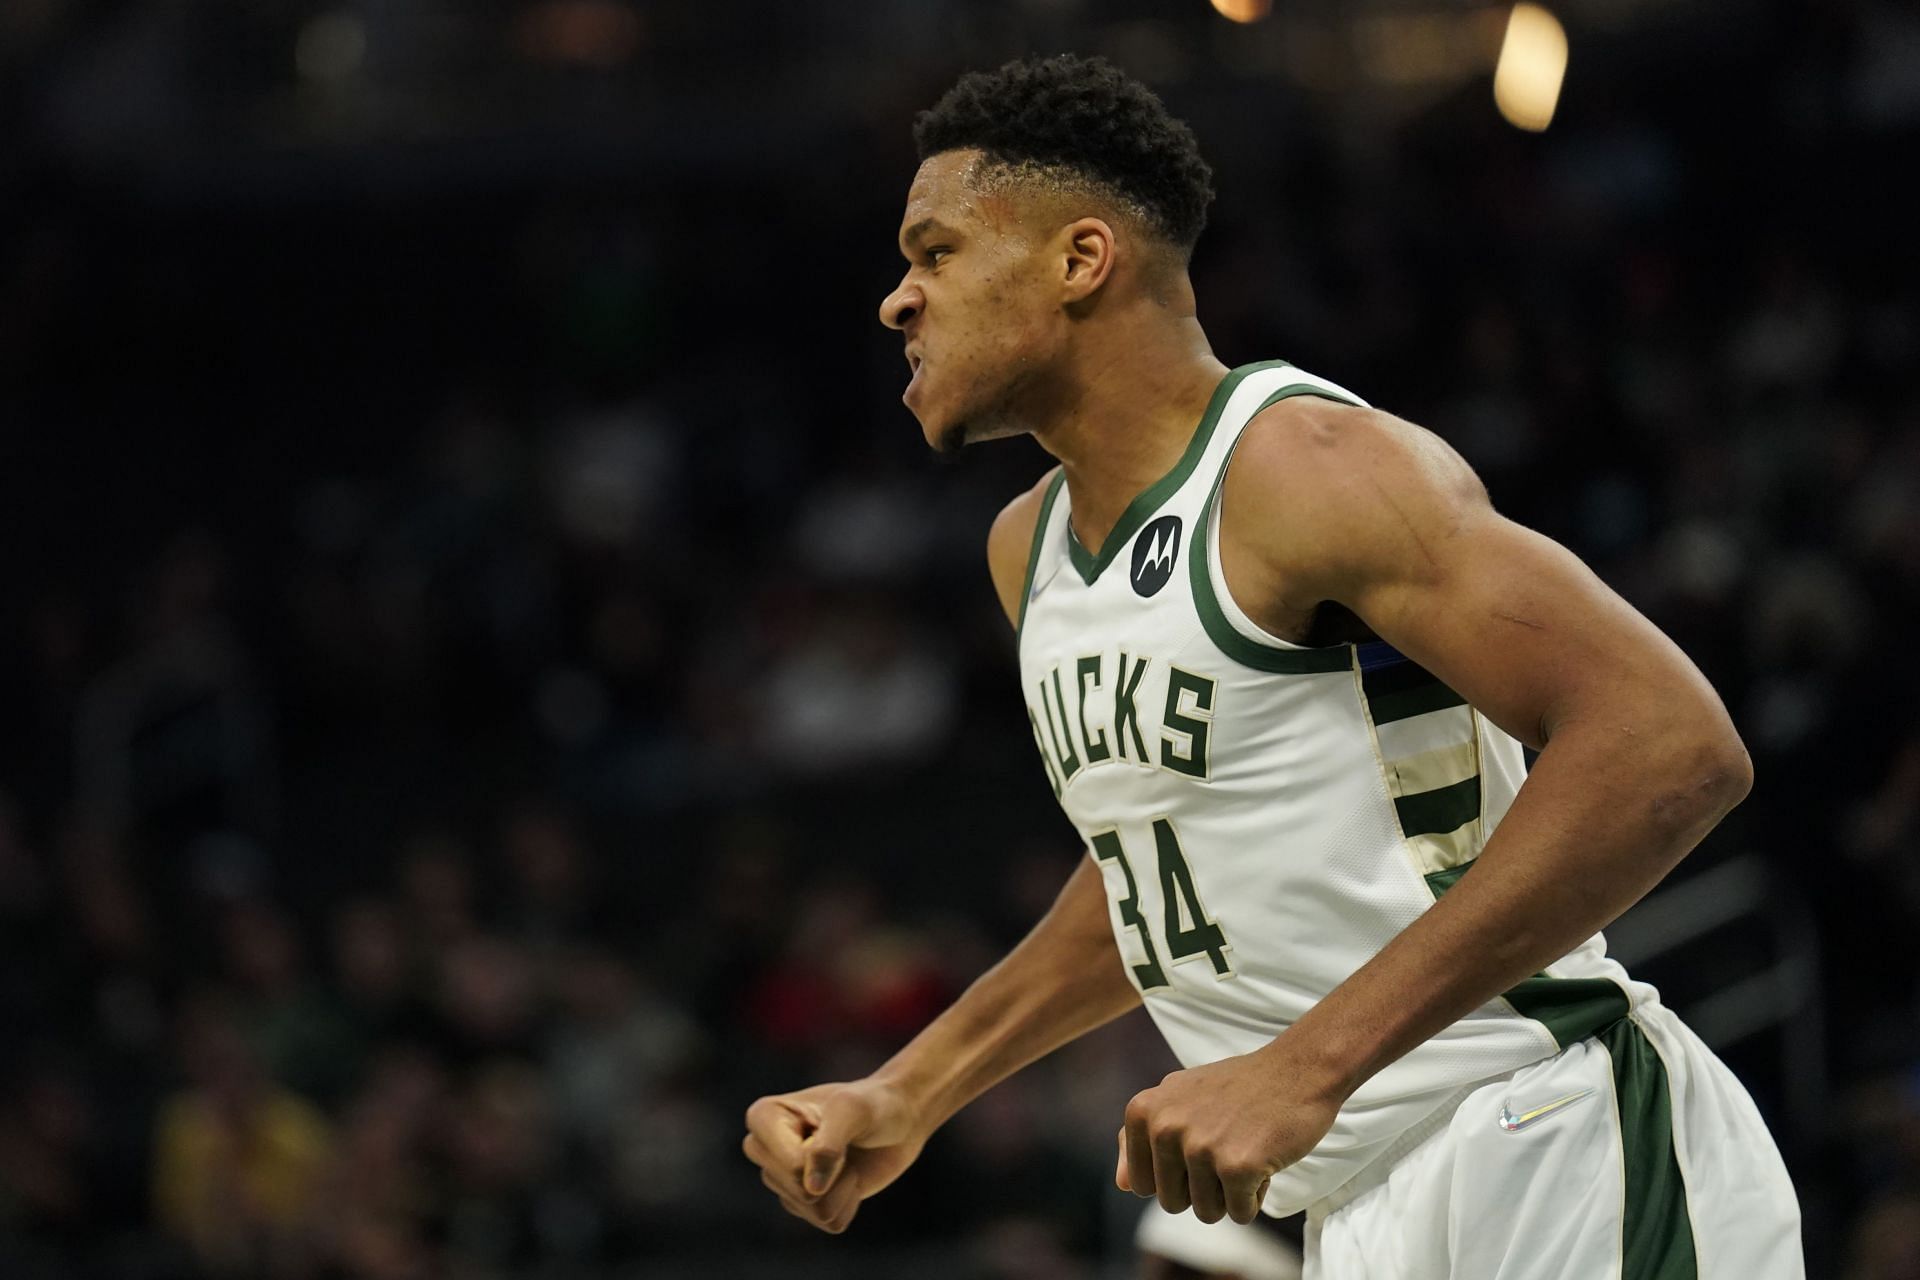  Milwaukee Bucks star Giannis Antetokounmpo will have an increased workload in the absence of some of his teammates